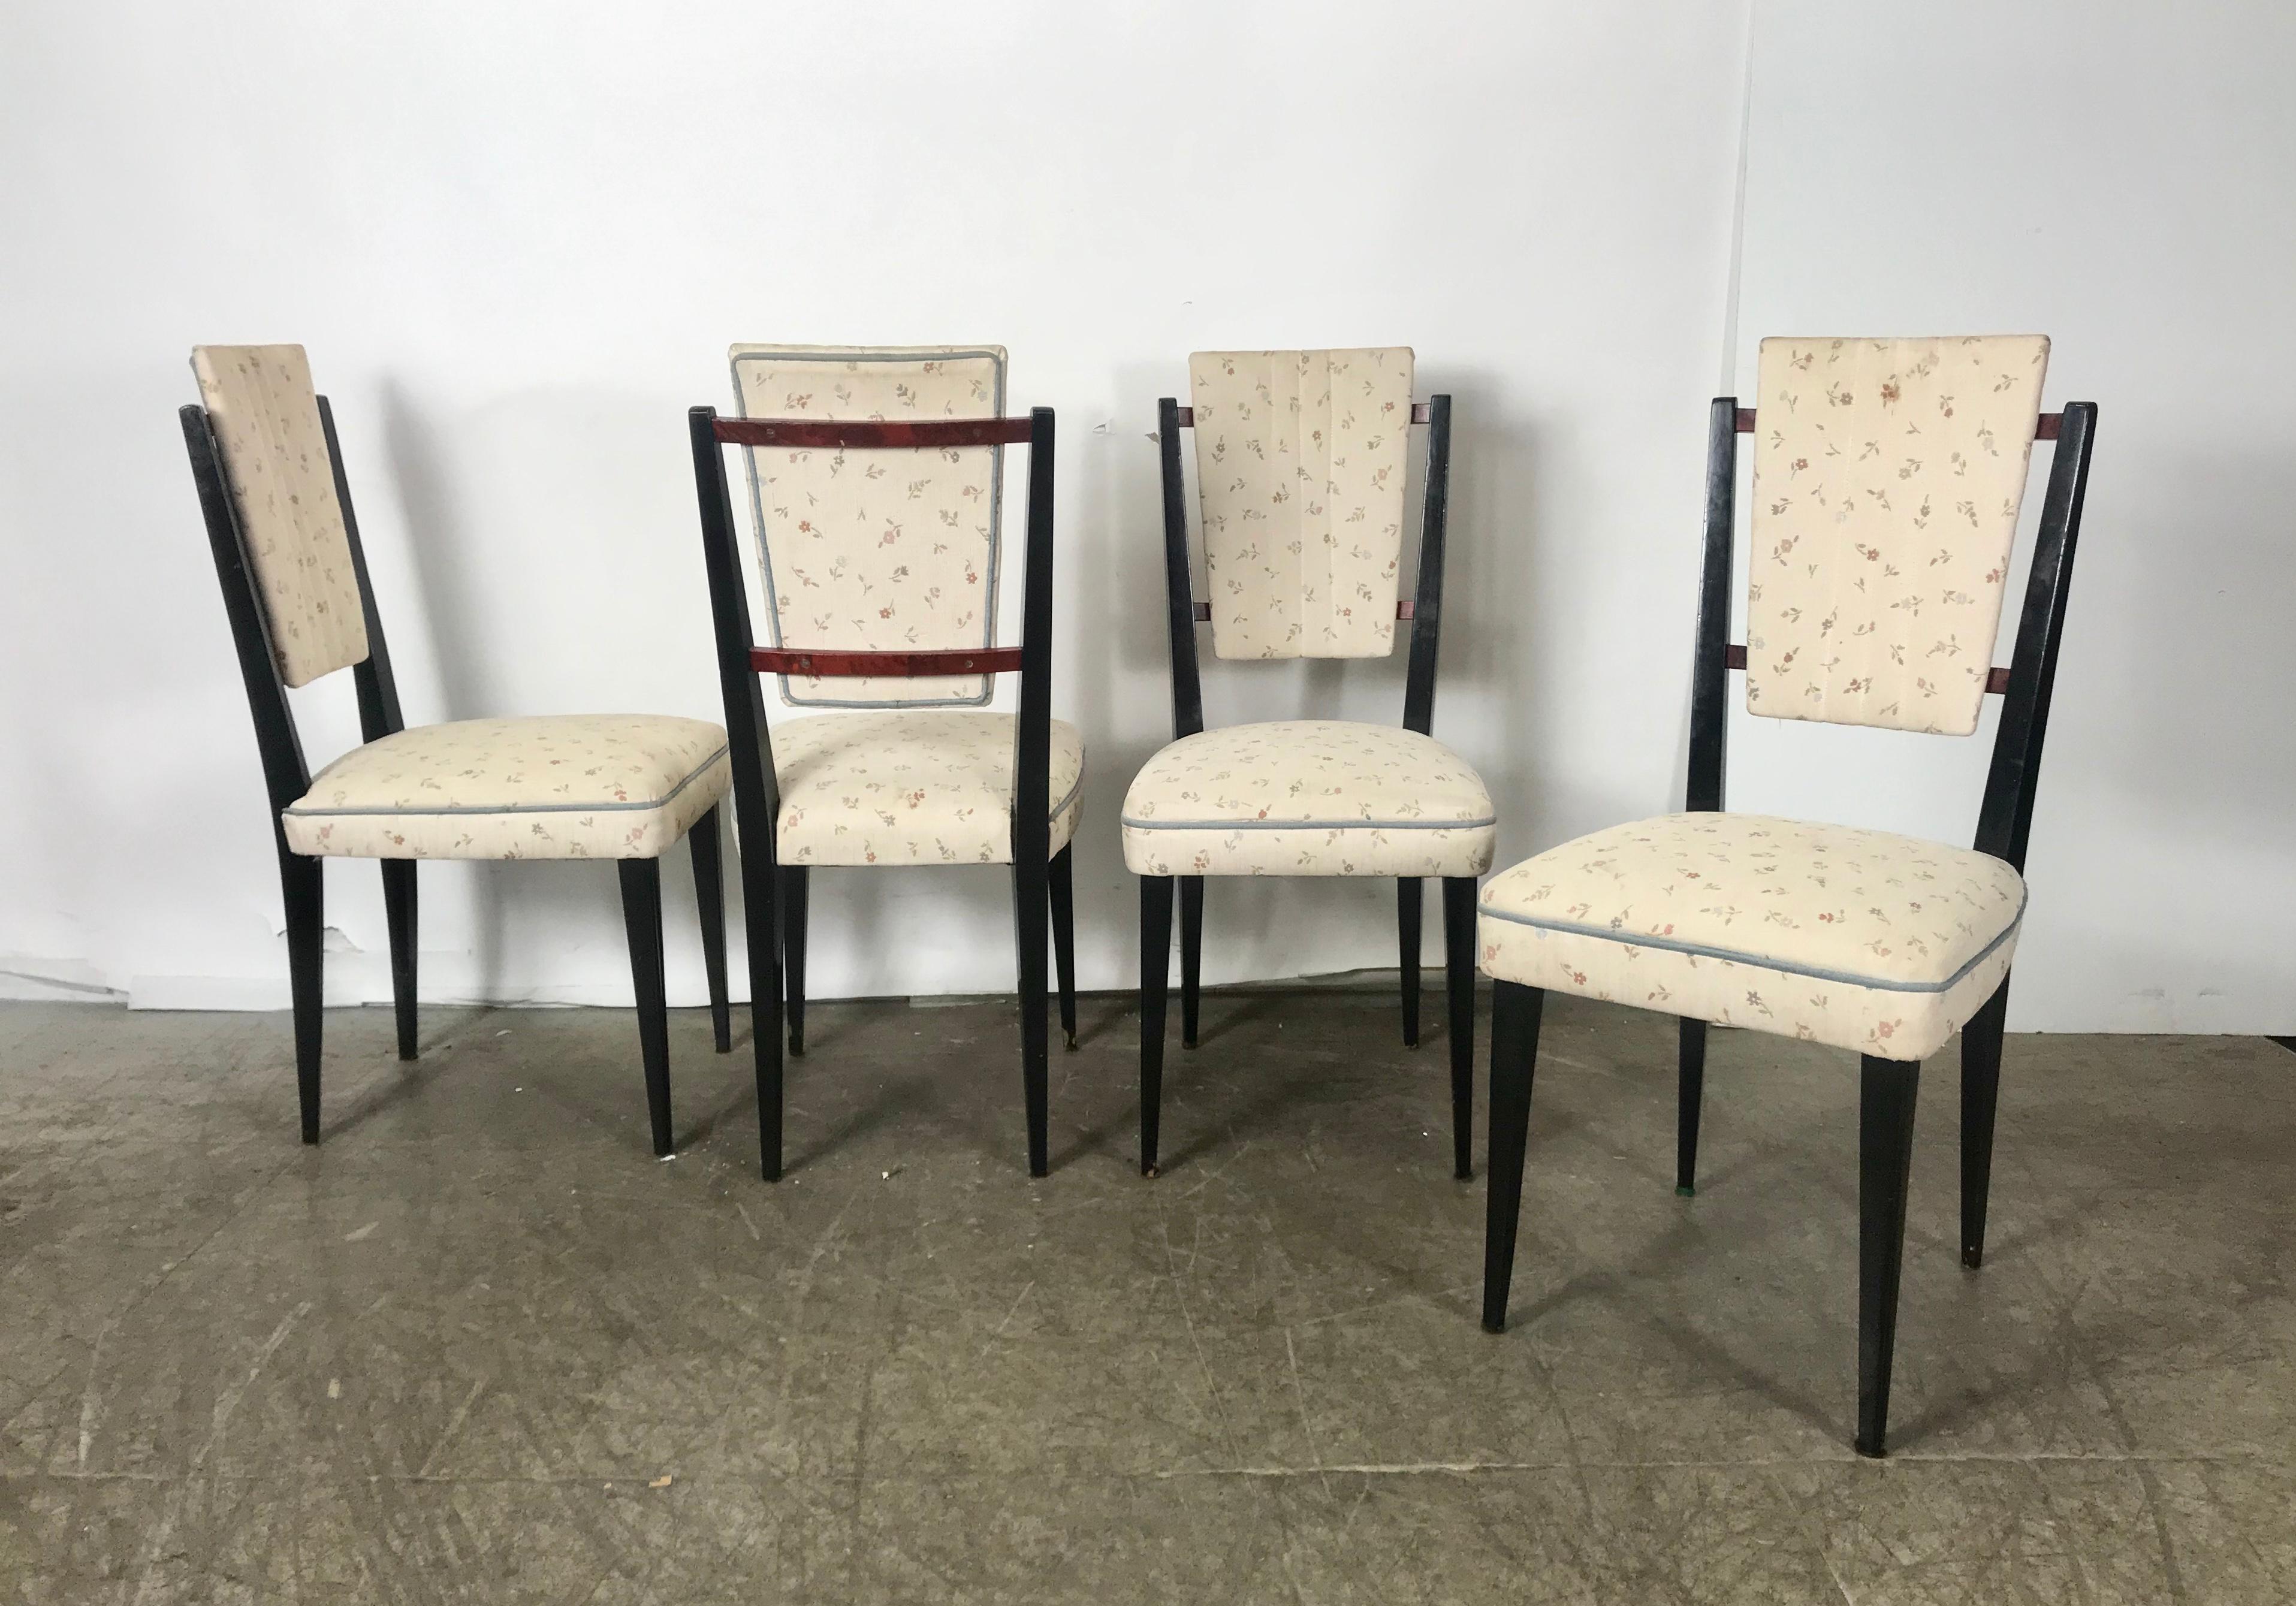 Stunning set of 12 Italian modernist dining chairs attributed to Osvaldo Borsani, Classic modern design, fit seamlessly into any modern, antique, traditional or contemporary environment. Black lacquer frames with amazing burl wood back detail, Can